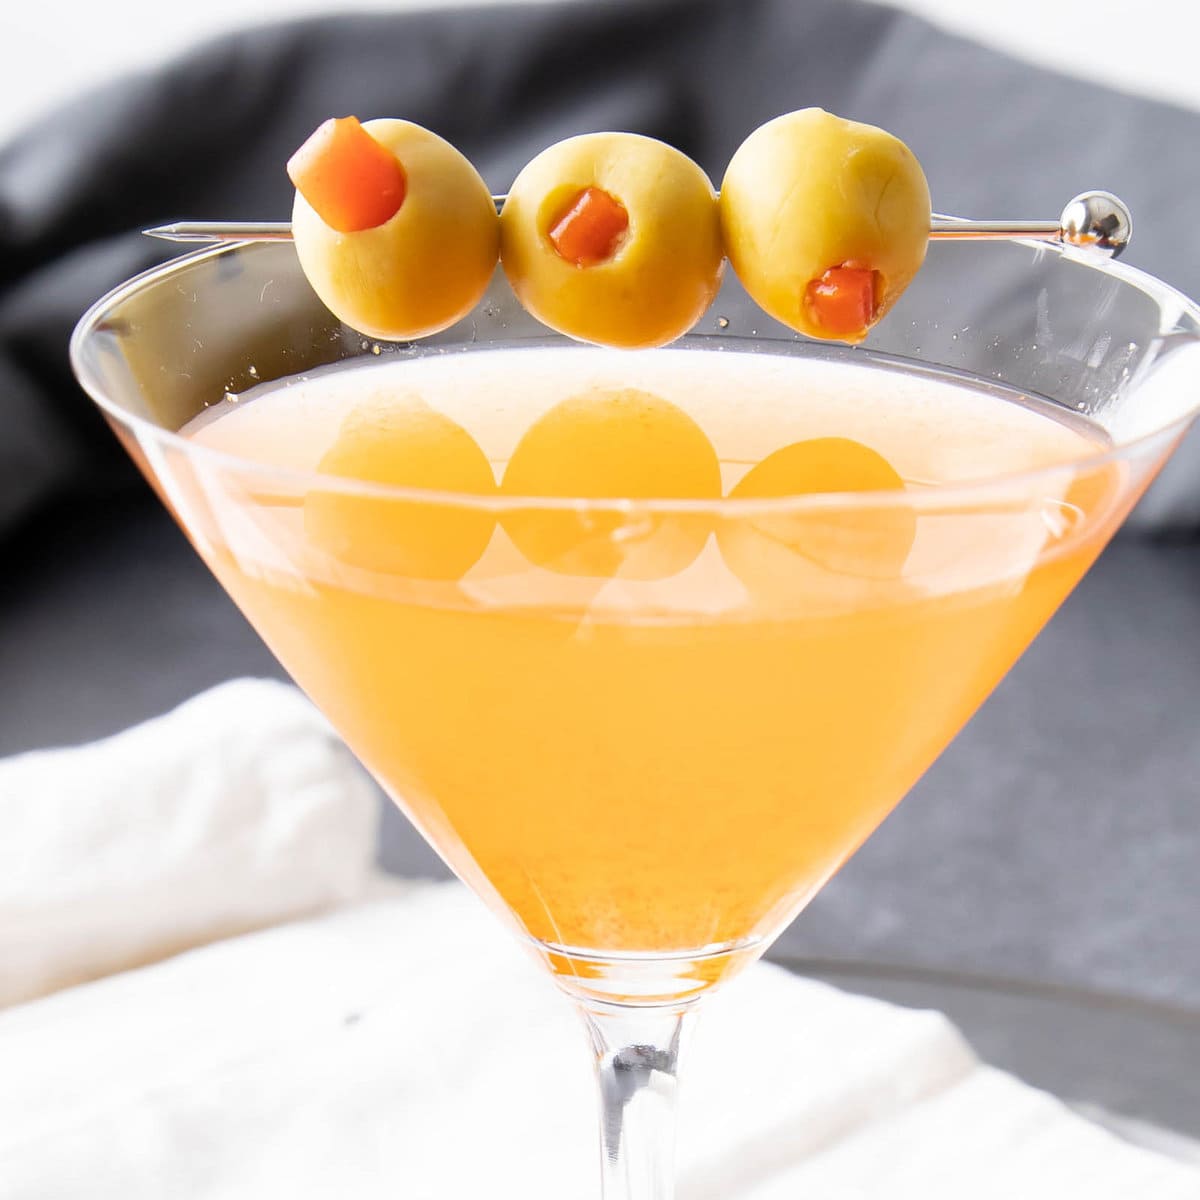 The bright orange Hot and Dirty Martini served with an olive skewer